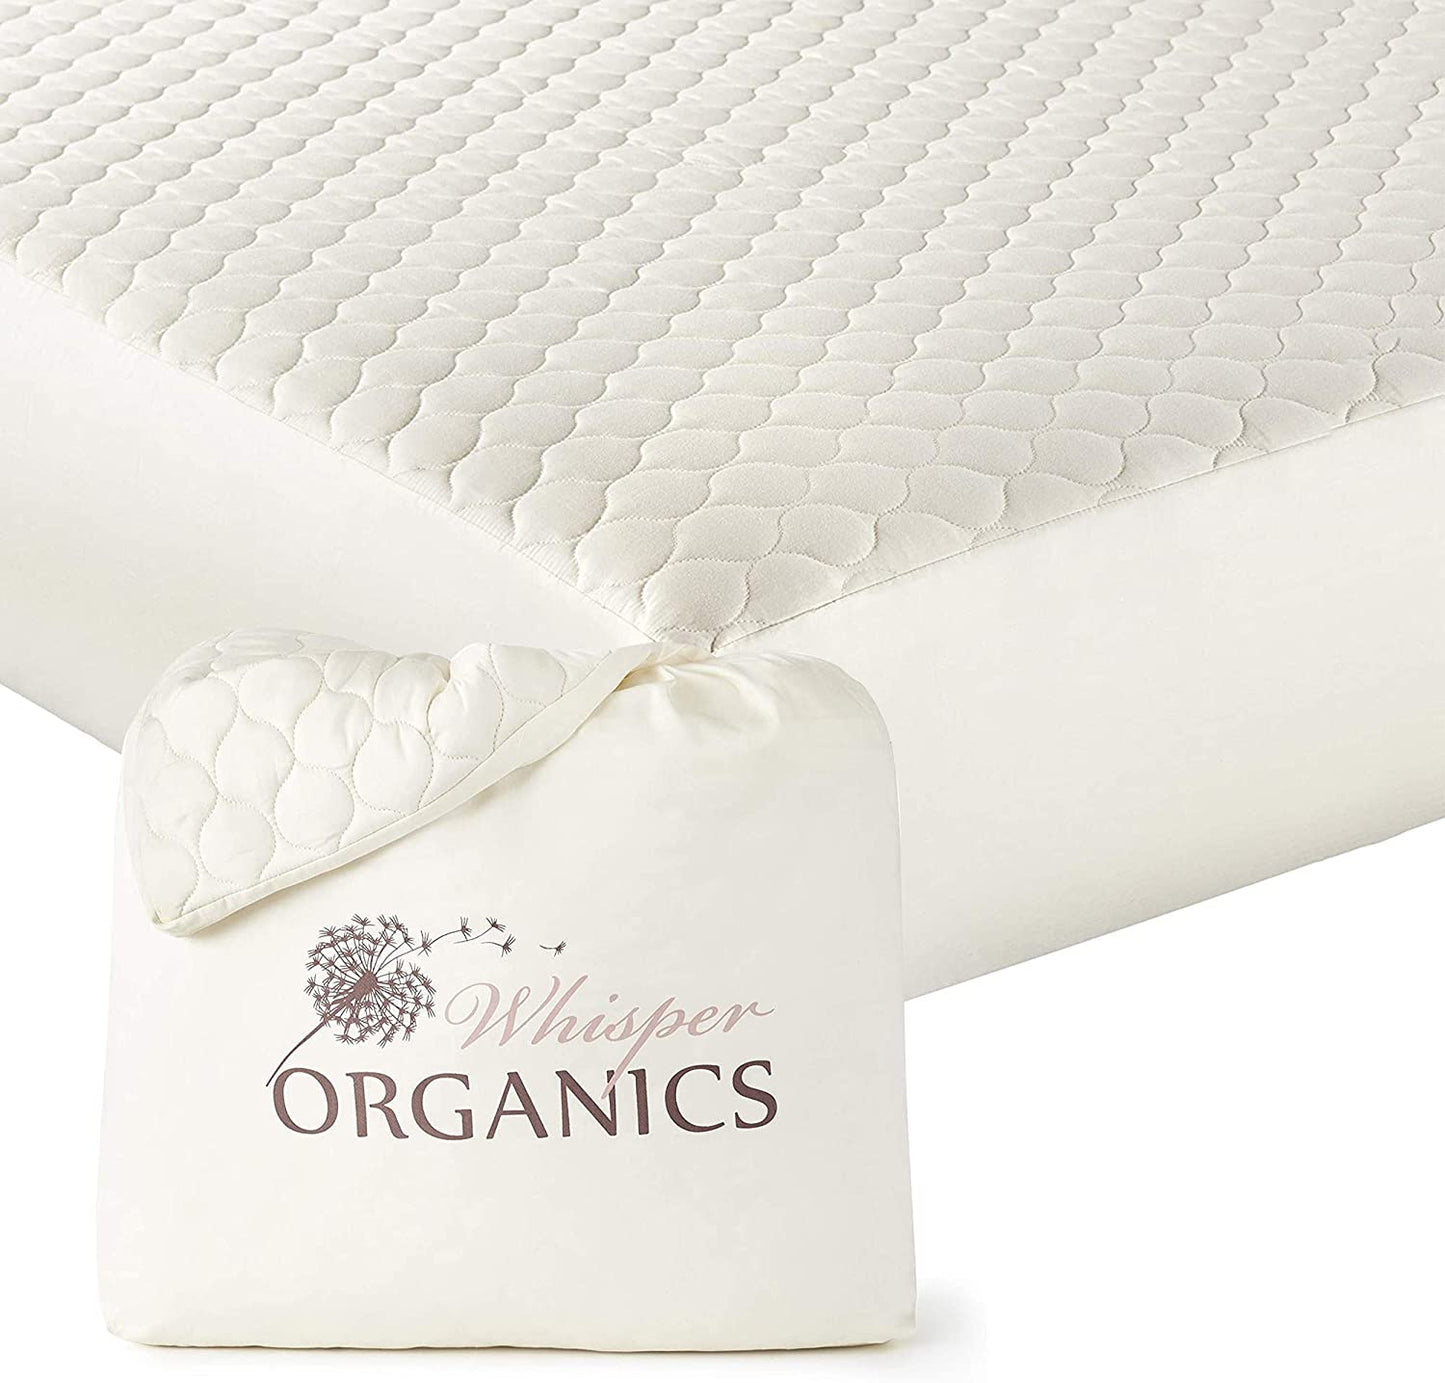 , 100% Organic Cotton Mattress Protector - Breathable Cooling Quilted Fitted Mattress Pad Cover, GOTS Certified - Ivory Color, 17" Deep Pocket (Full Bed Size)